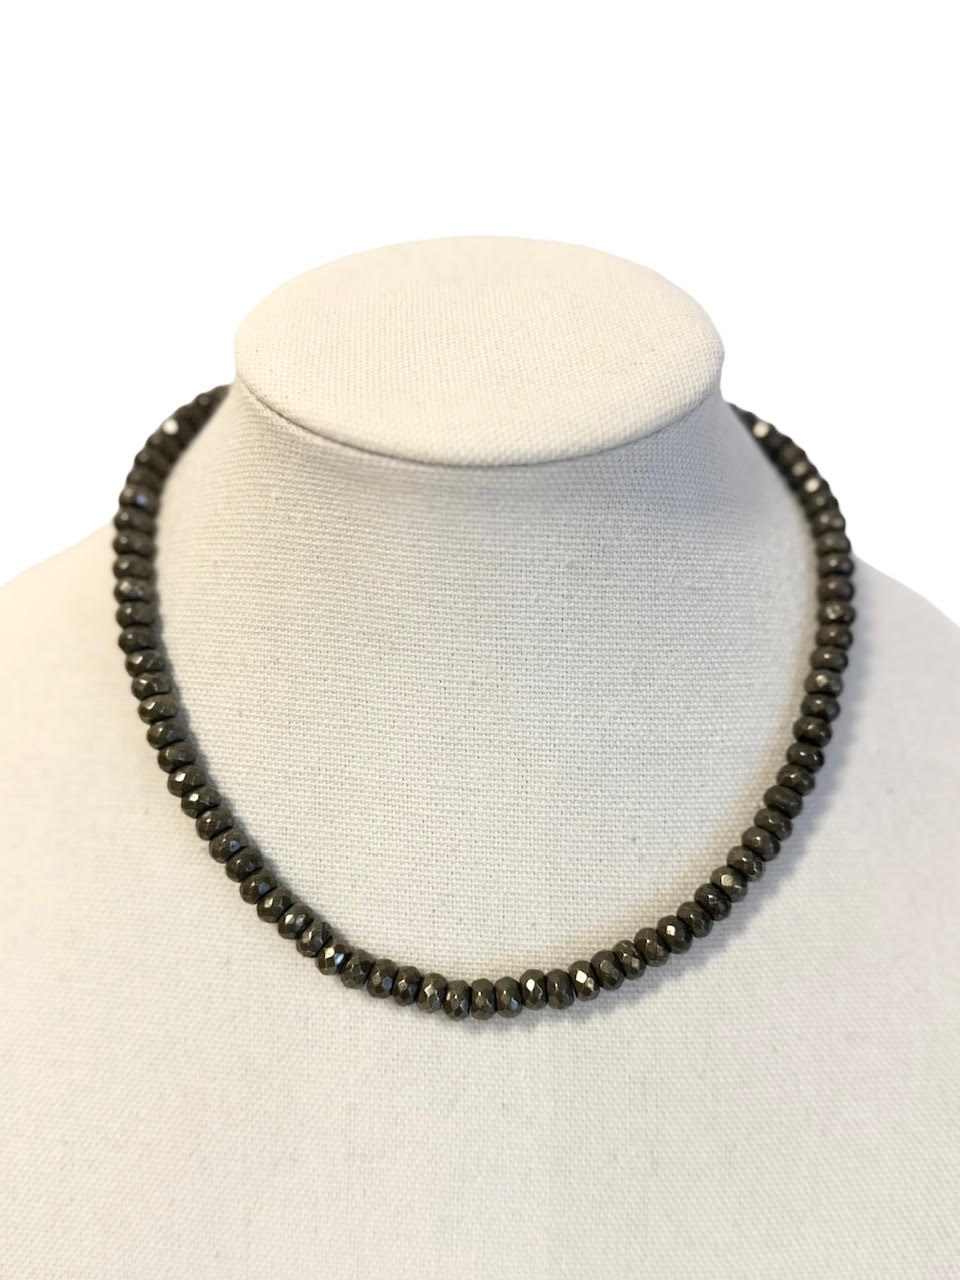 Rondelle 18" Necklace with Small Swivel Clasp in gunmetal by Virtue